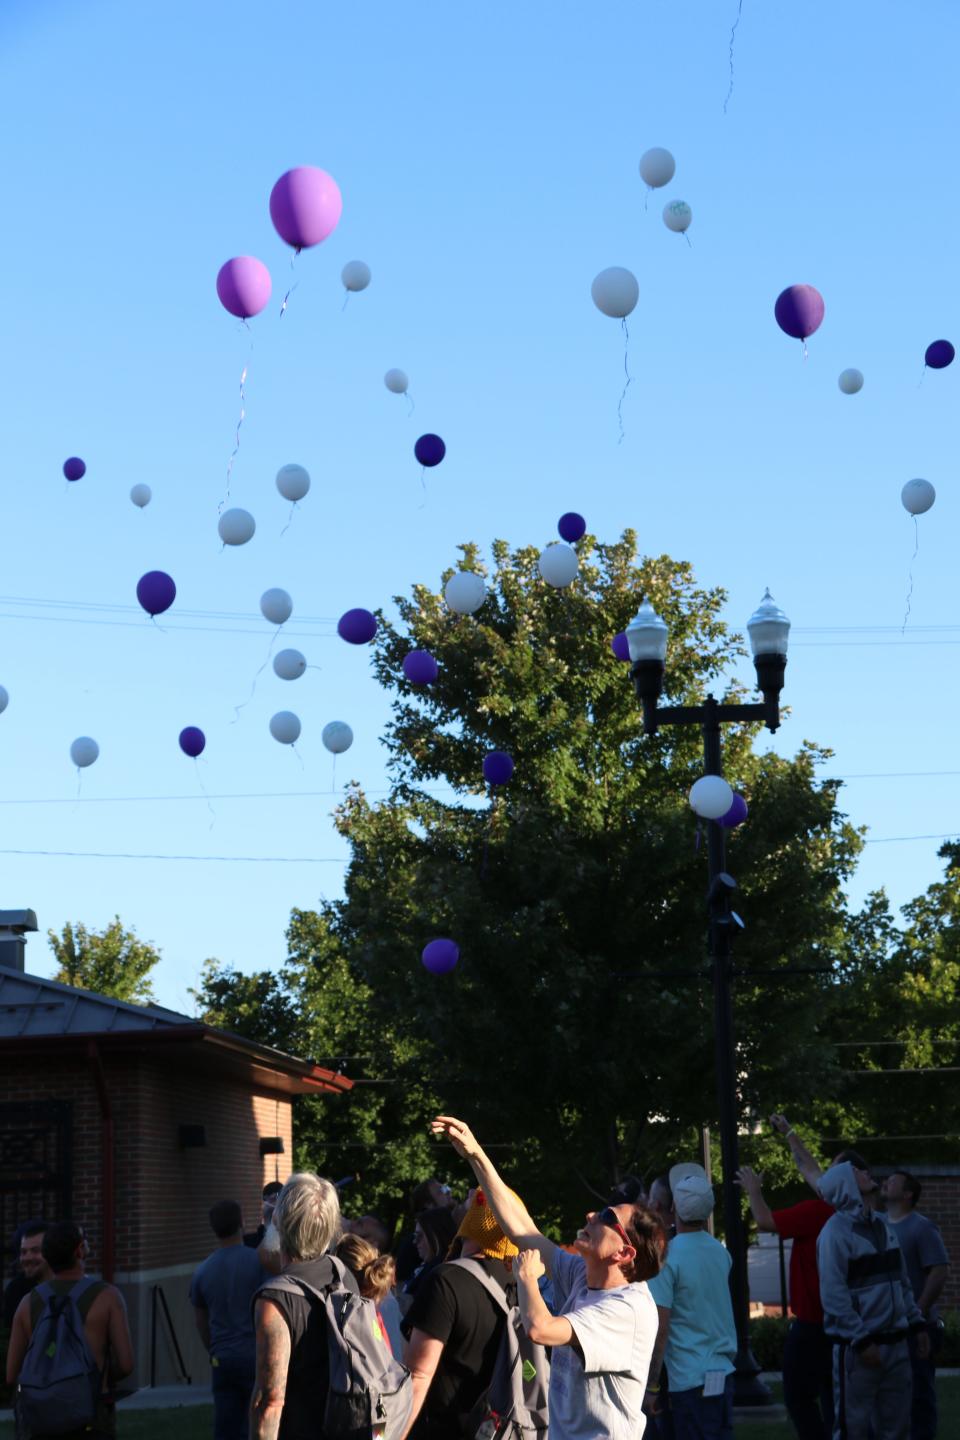 Nestor Matthews, a volunteer with Newark Homeless Outreach, joins others at an Aug. 31, event in releasing balloons in memory of those who died.